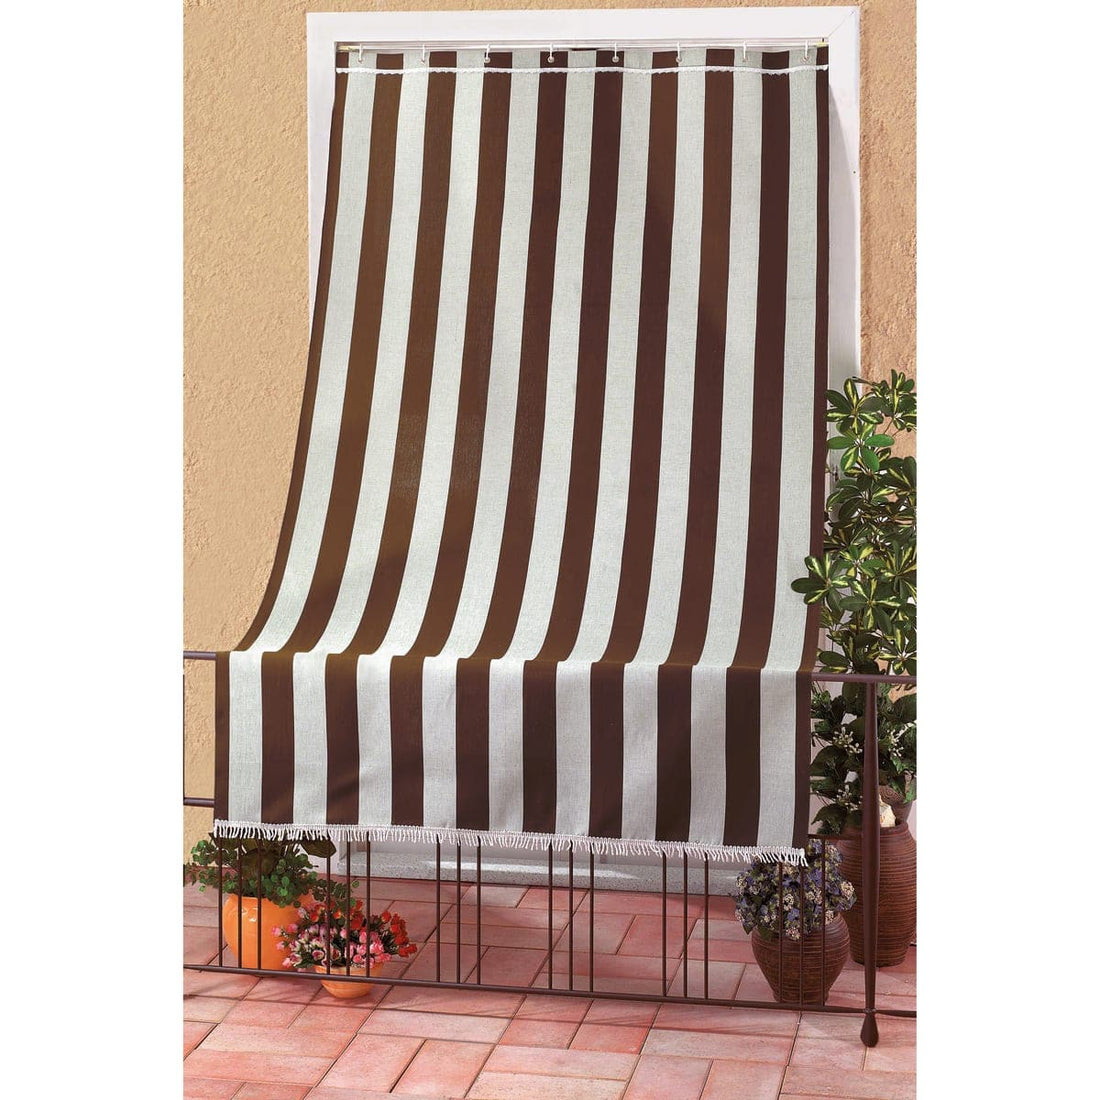 CARIBBEAN BALCONY AWNING 140X300 R/BROWN W/GROMMETS AND HOOKS - best price from Maltashopper.com BR440002939